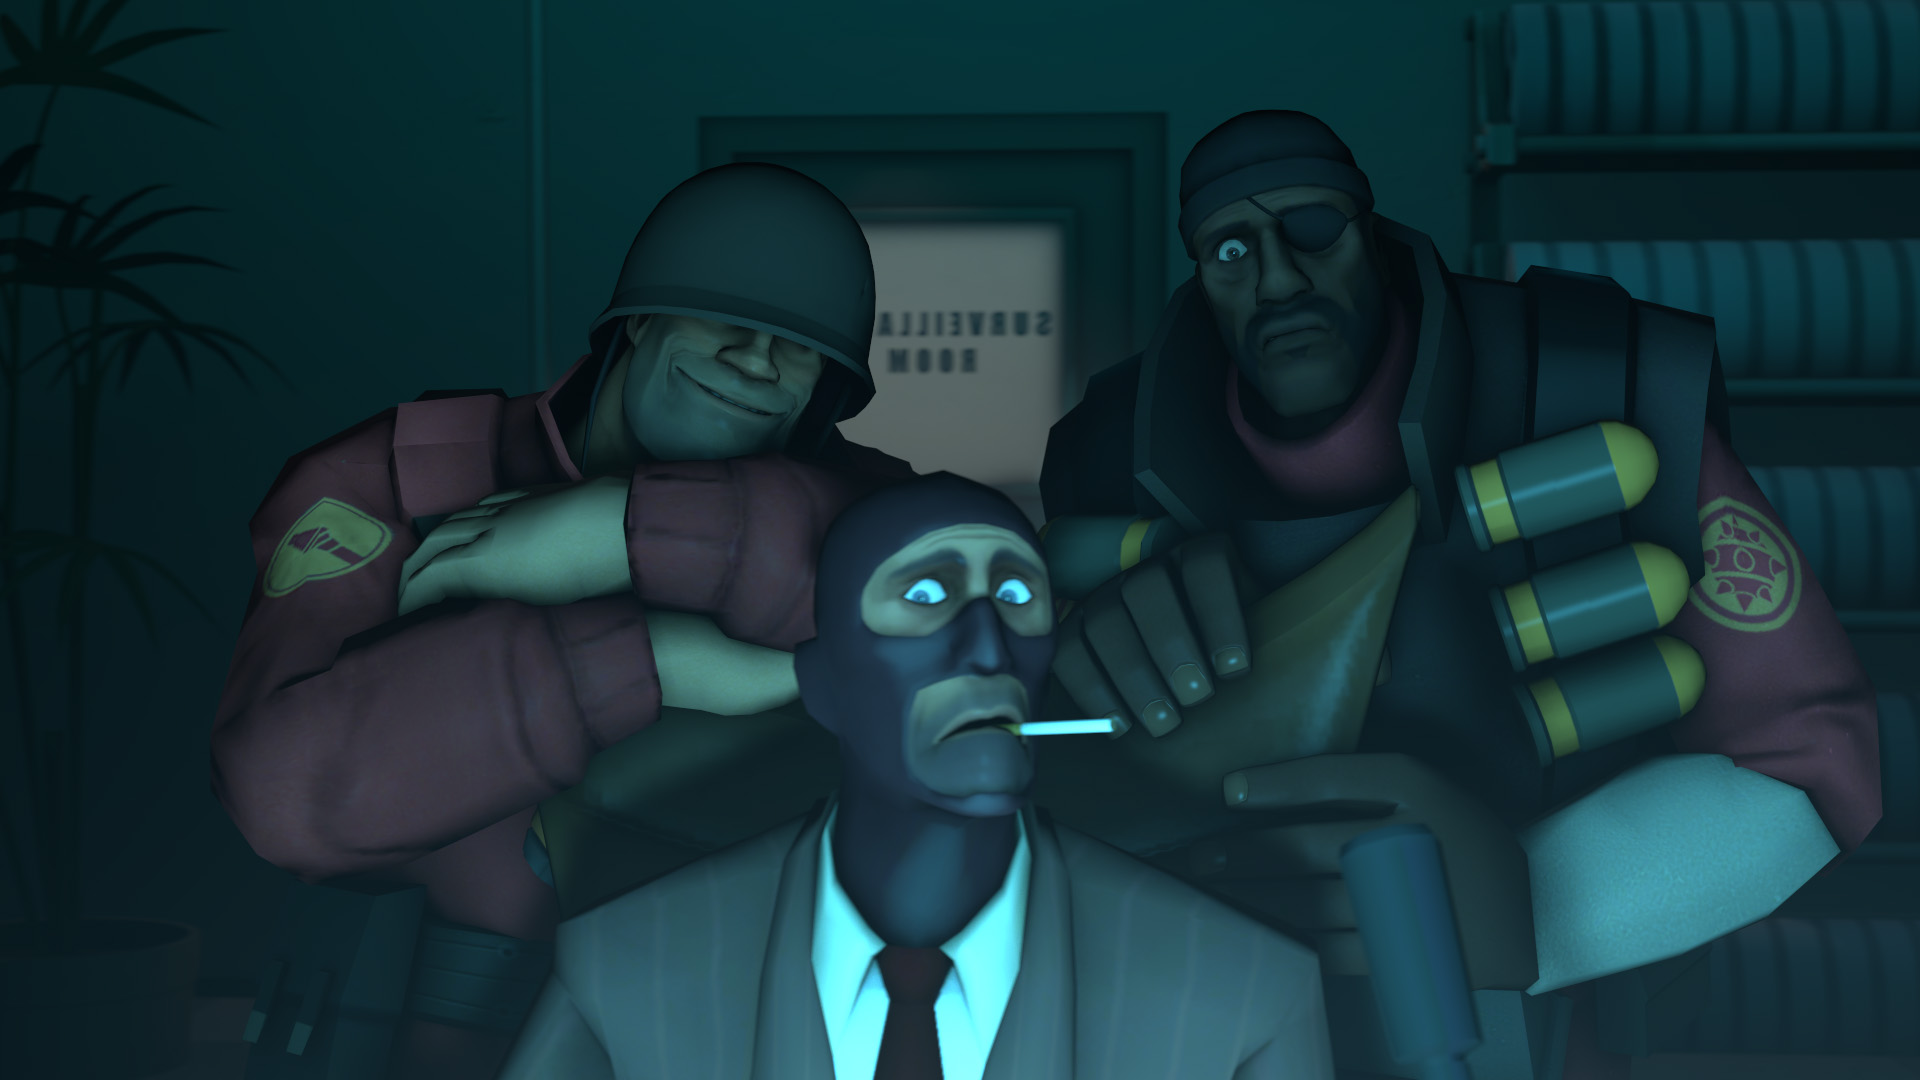 Team Fortress, Team Fortress 2, TF2, Spy, Game, FPS, Shooter, Team Based